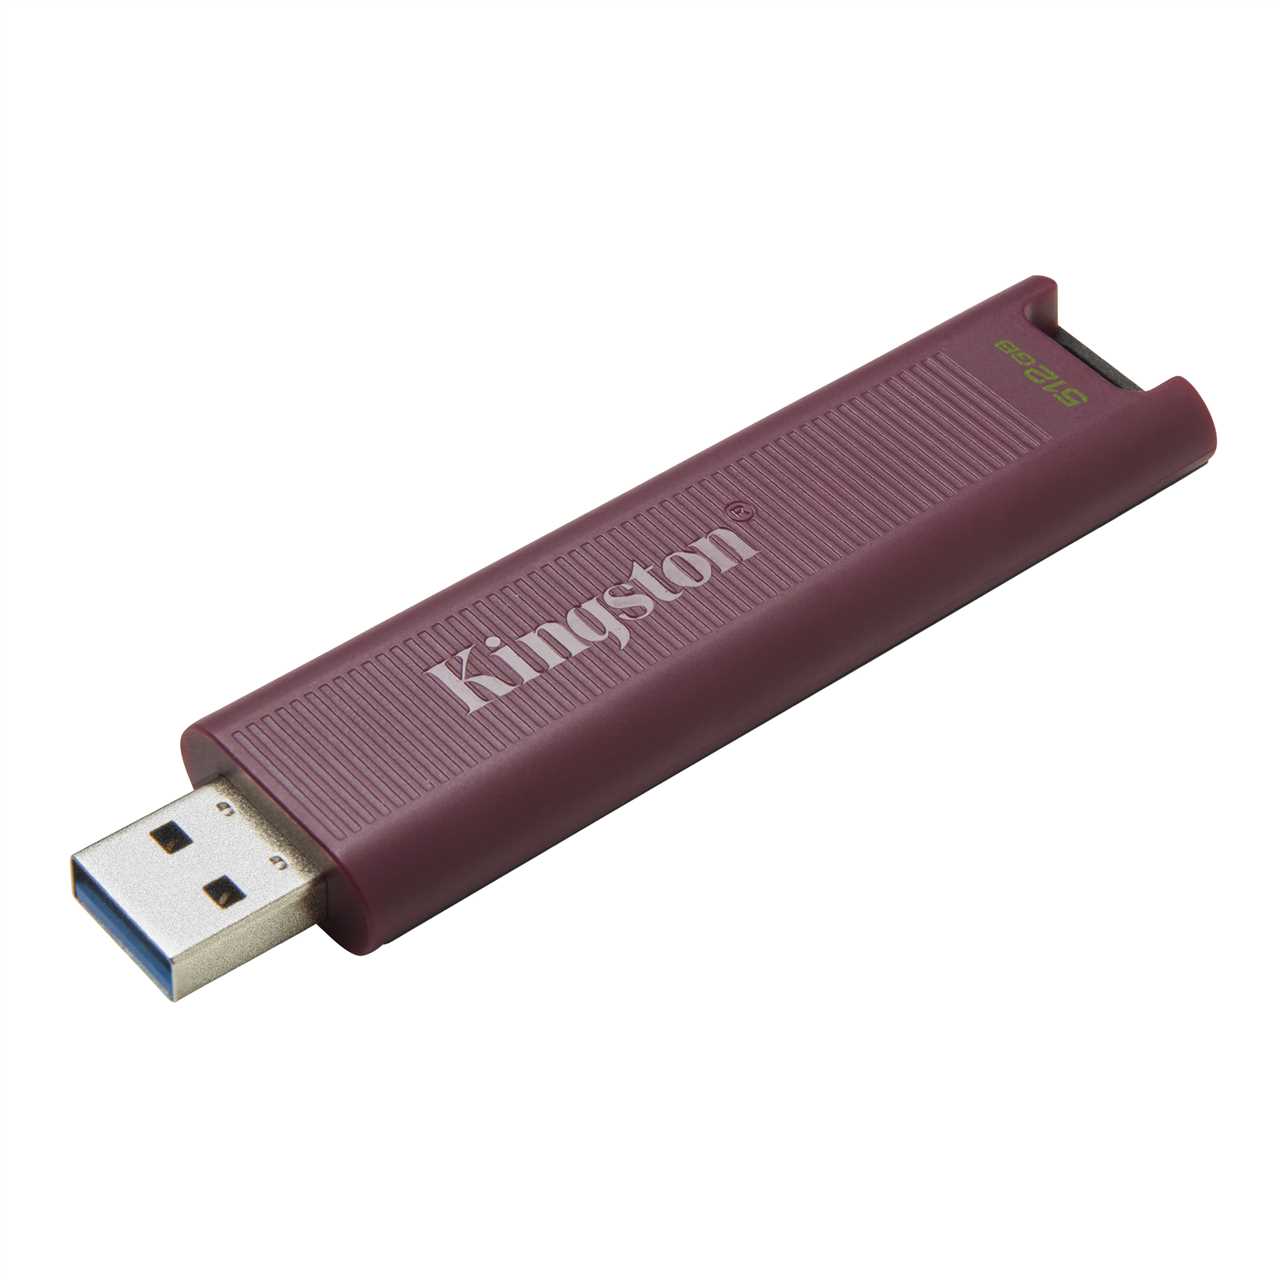 Applications of Best 128GB Flash Drive